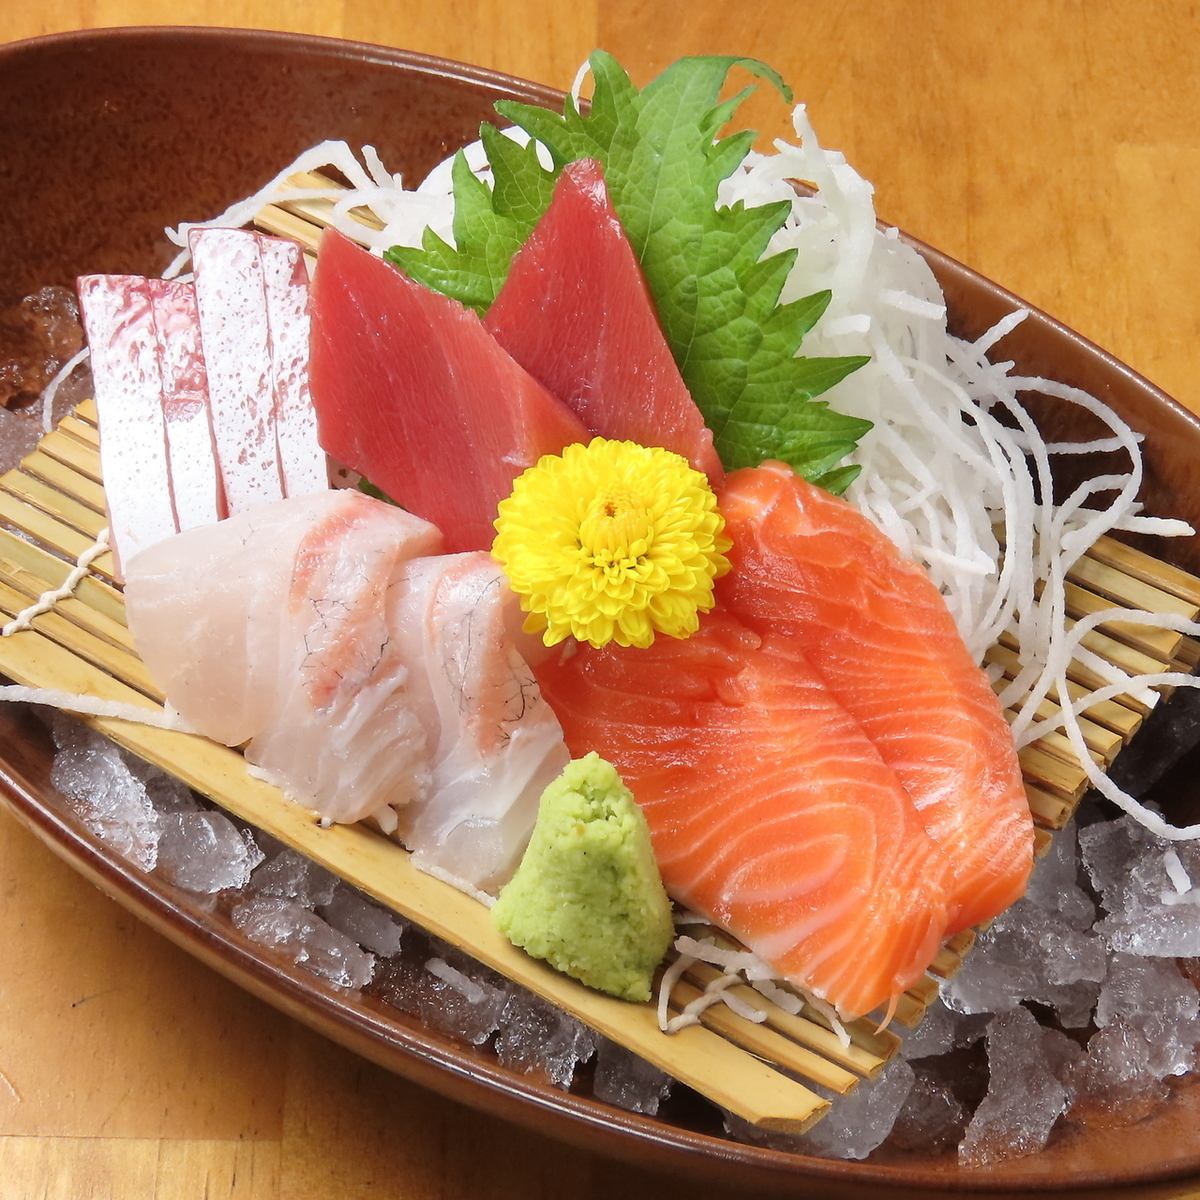 The sashimi and tempura eaten directly from the market and eaten at the izakaya with a fresh fish shop are exquisite! Choose the course and you'll be sure to enjoy it!